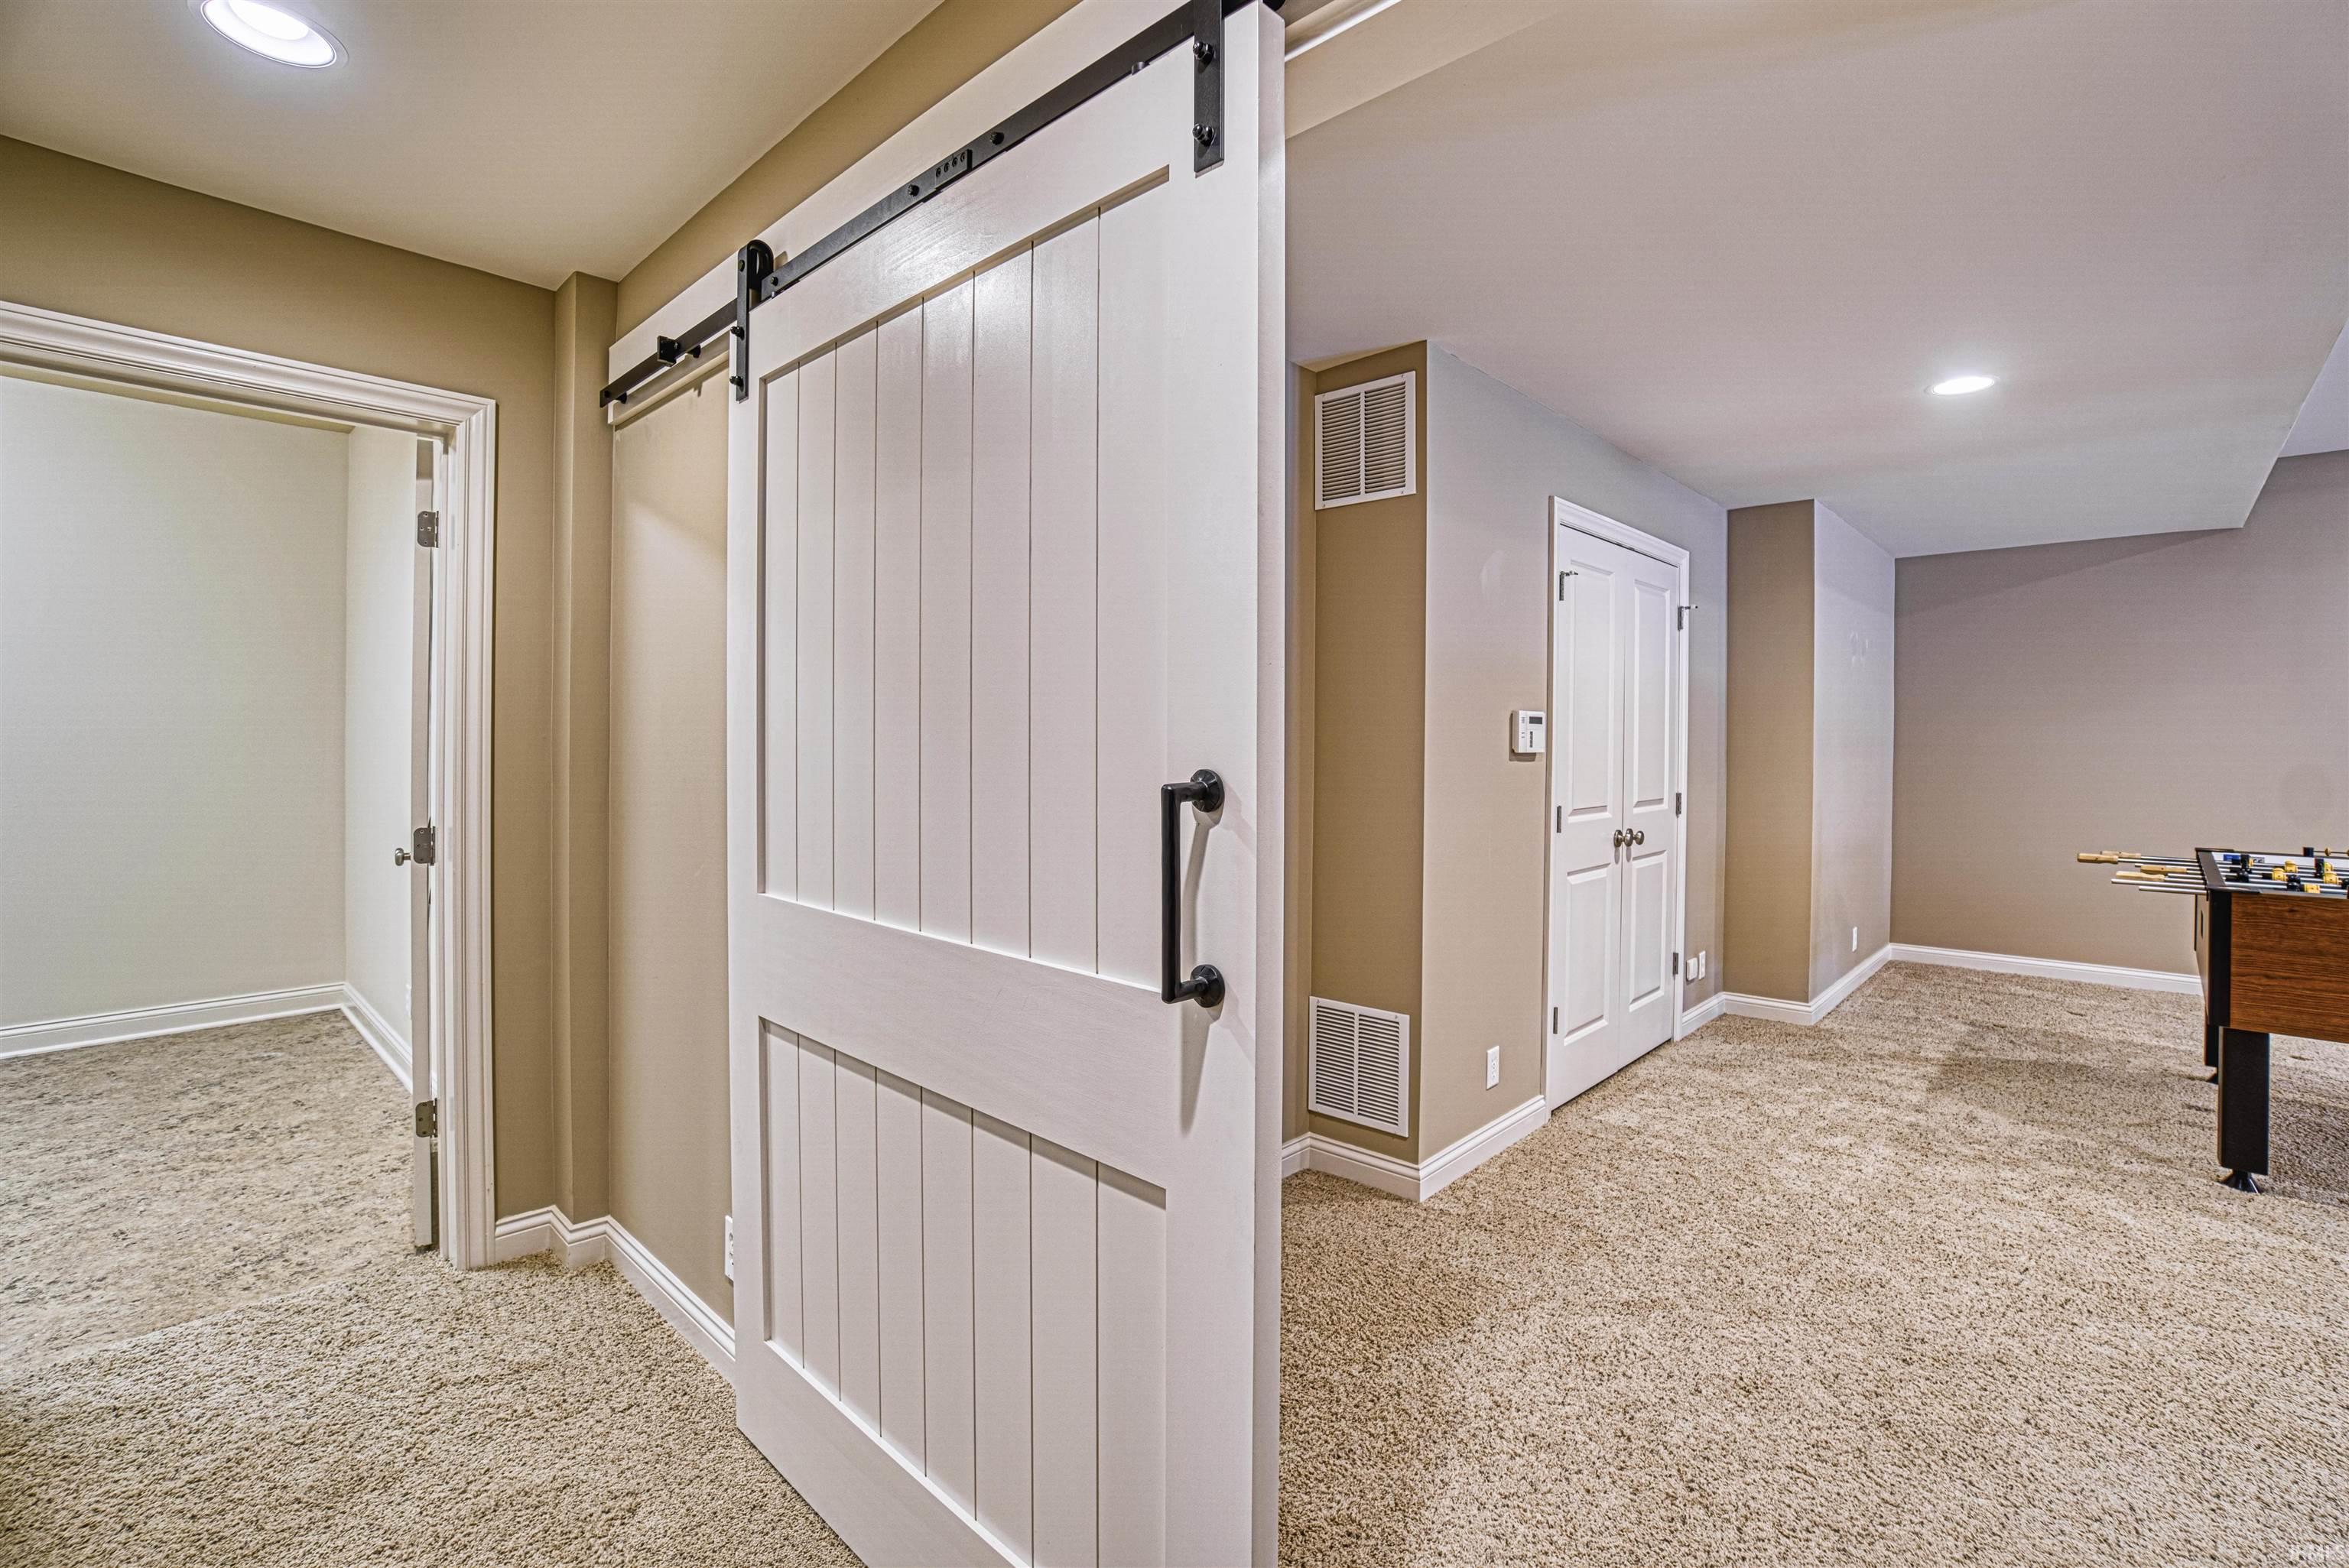 The barn door separates the in-law suite that offers...